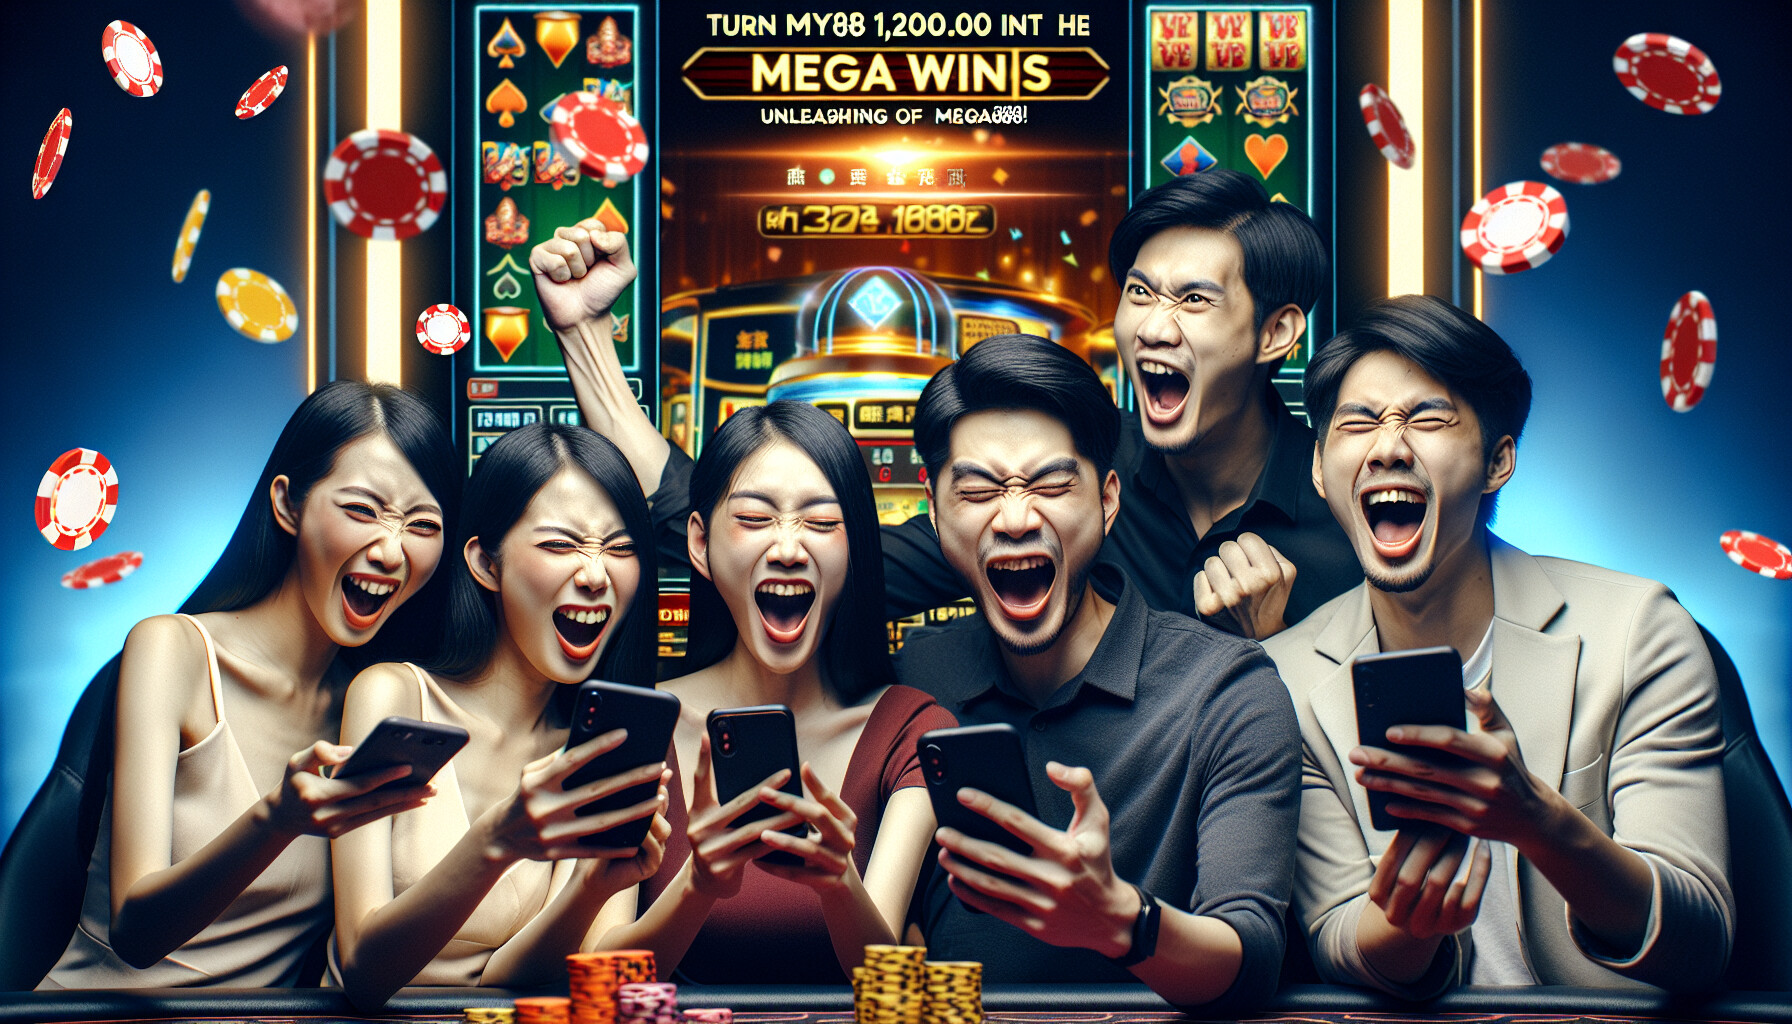 🎰💰 Win big with Mega888! Start from MYR200.00 and climb to MYR1,600.00 in no time! Join the fun now! 💥🍀 #Mega888 #OnlineCasino #BigWins